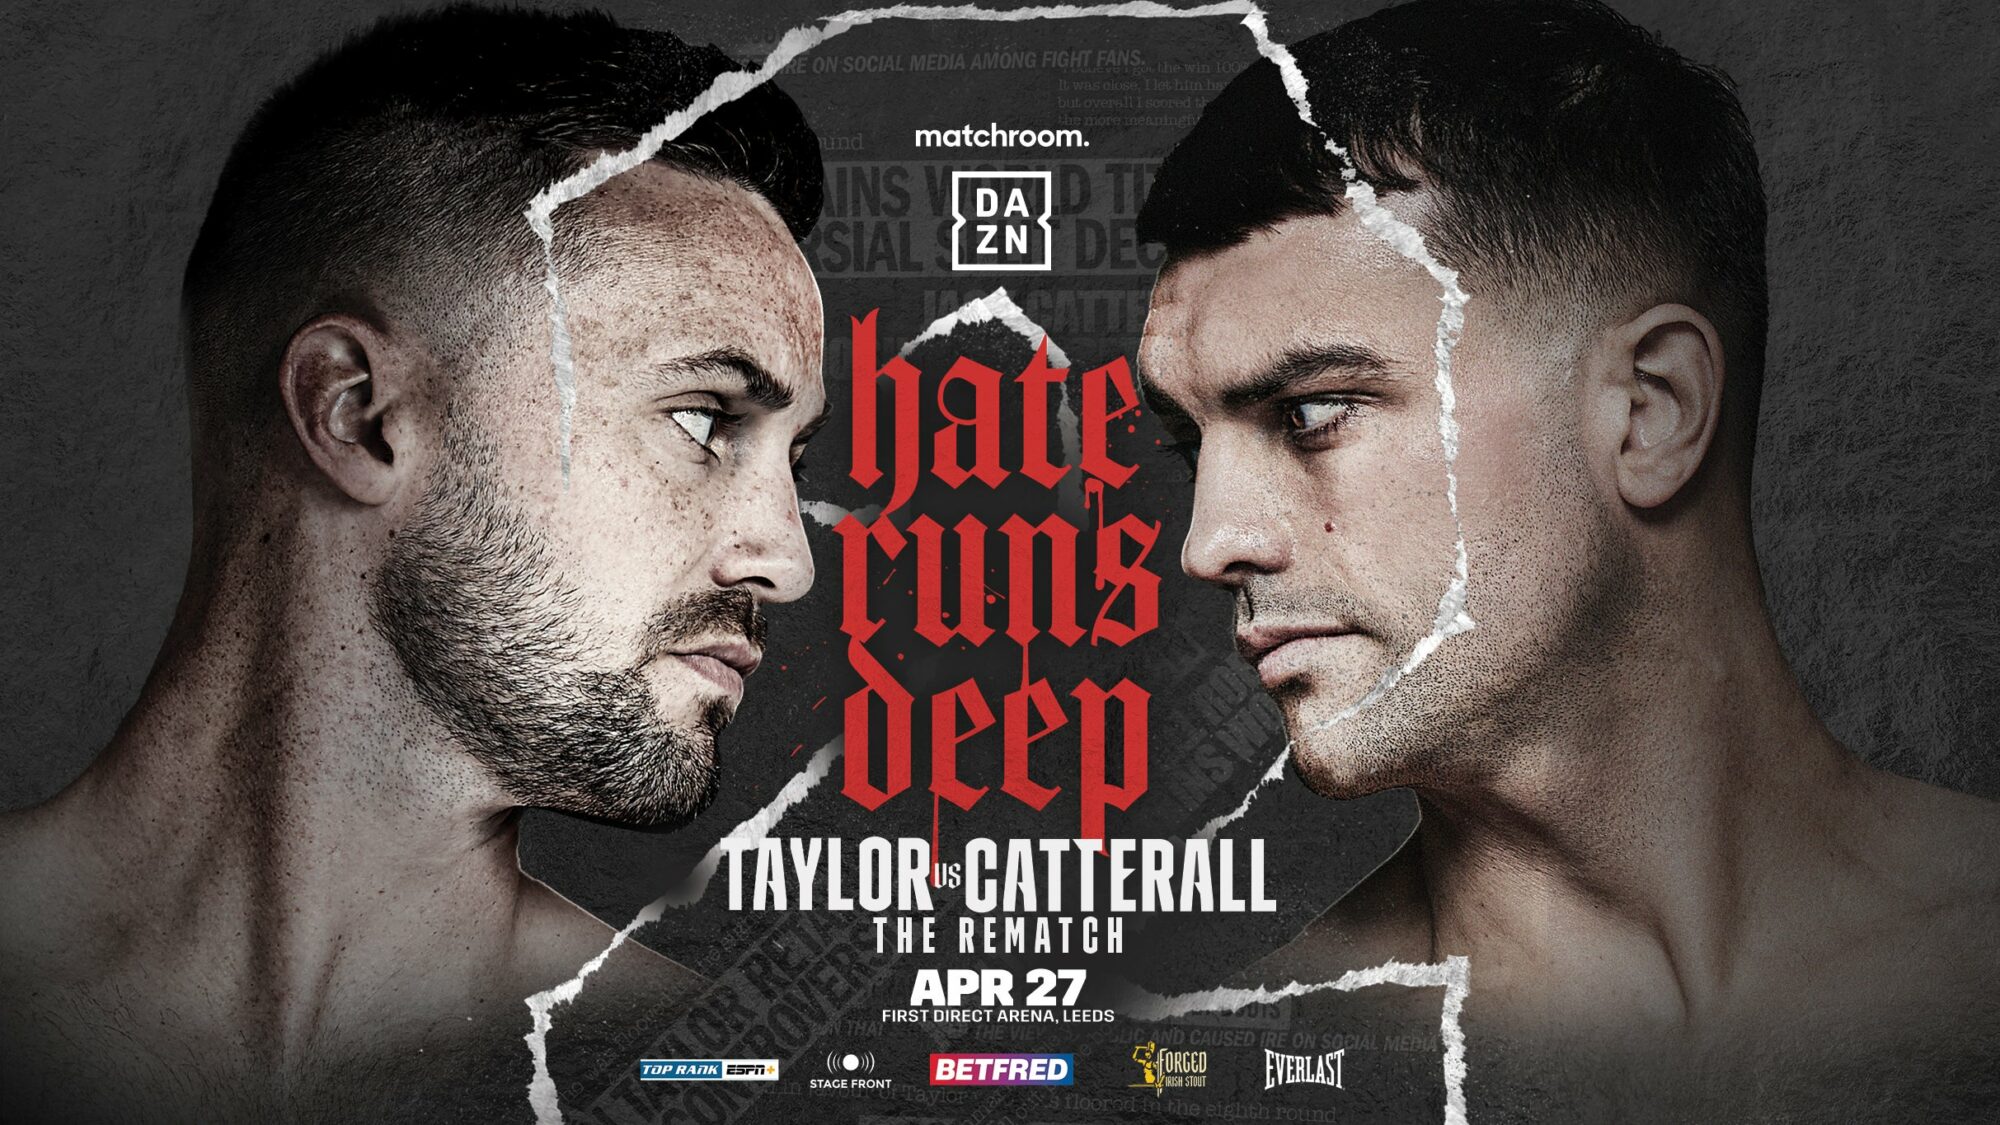 Image name Matchroom Boxing Josh Taylor vs Jack Catterall at First Direct Arena Leeds the 3 image from the post Matchroom Boxing: Josh Taylor vs Jack Catterall at First Direct Arena, Leeds in Yorkshire.com.